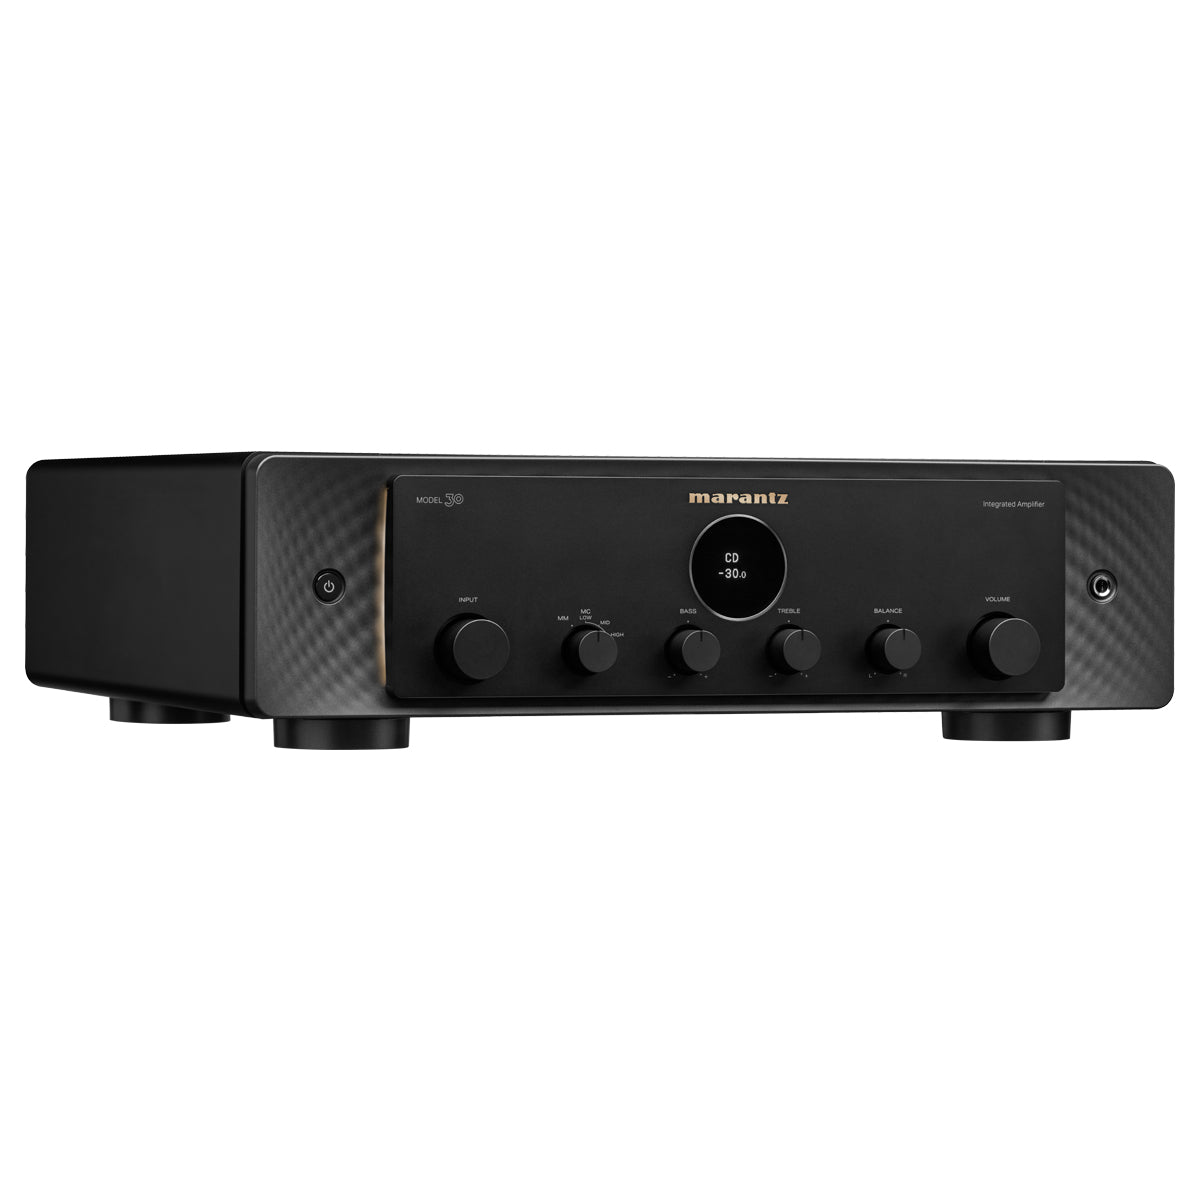 Marantz Model 30 Integrated Stereo Amplifier - Black | Made in Japan - The Audio Experts